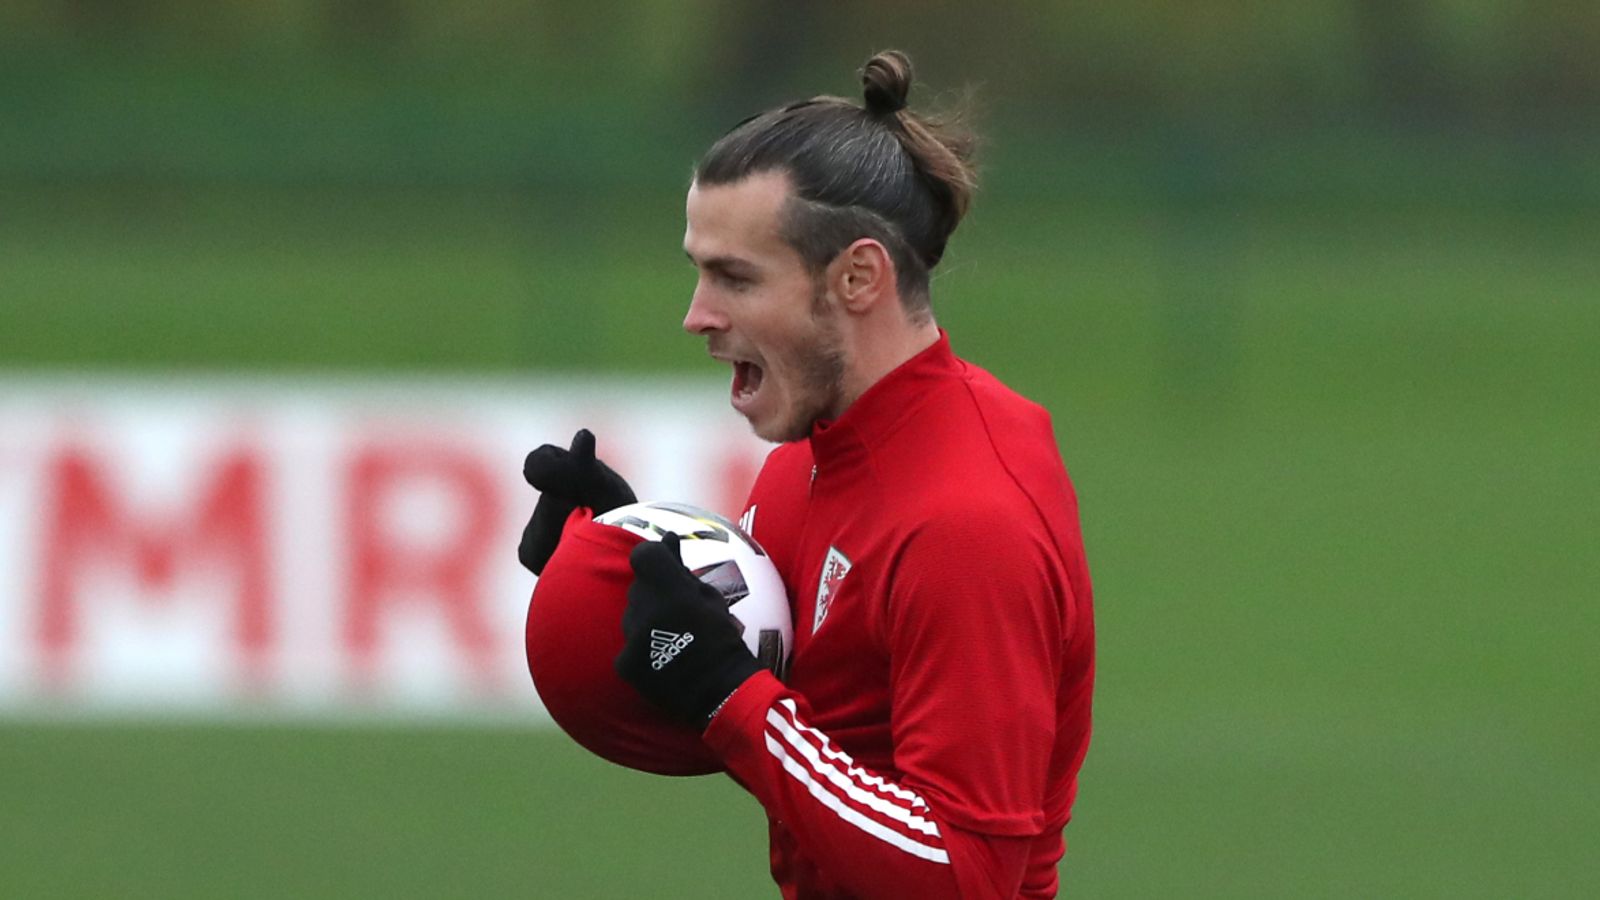 gareth-bale-wales-caretaker-manager-robert-page-says-spurs-forward-is-loving-his-football-again